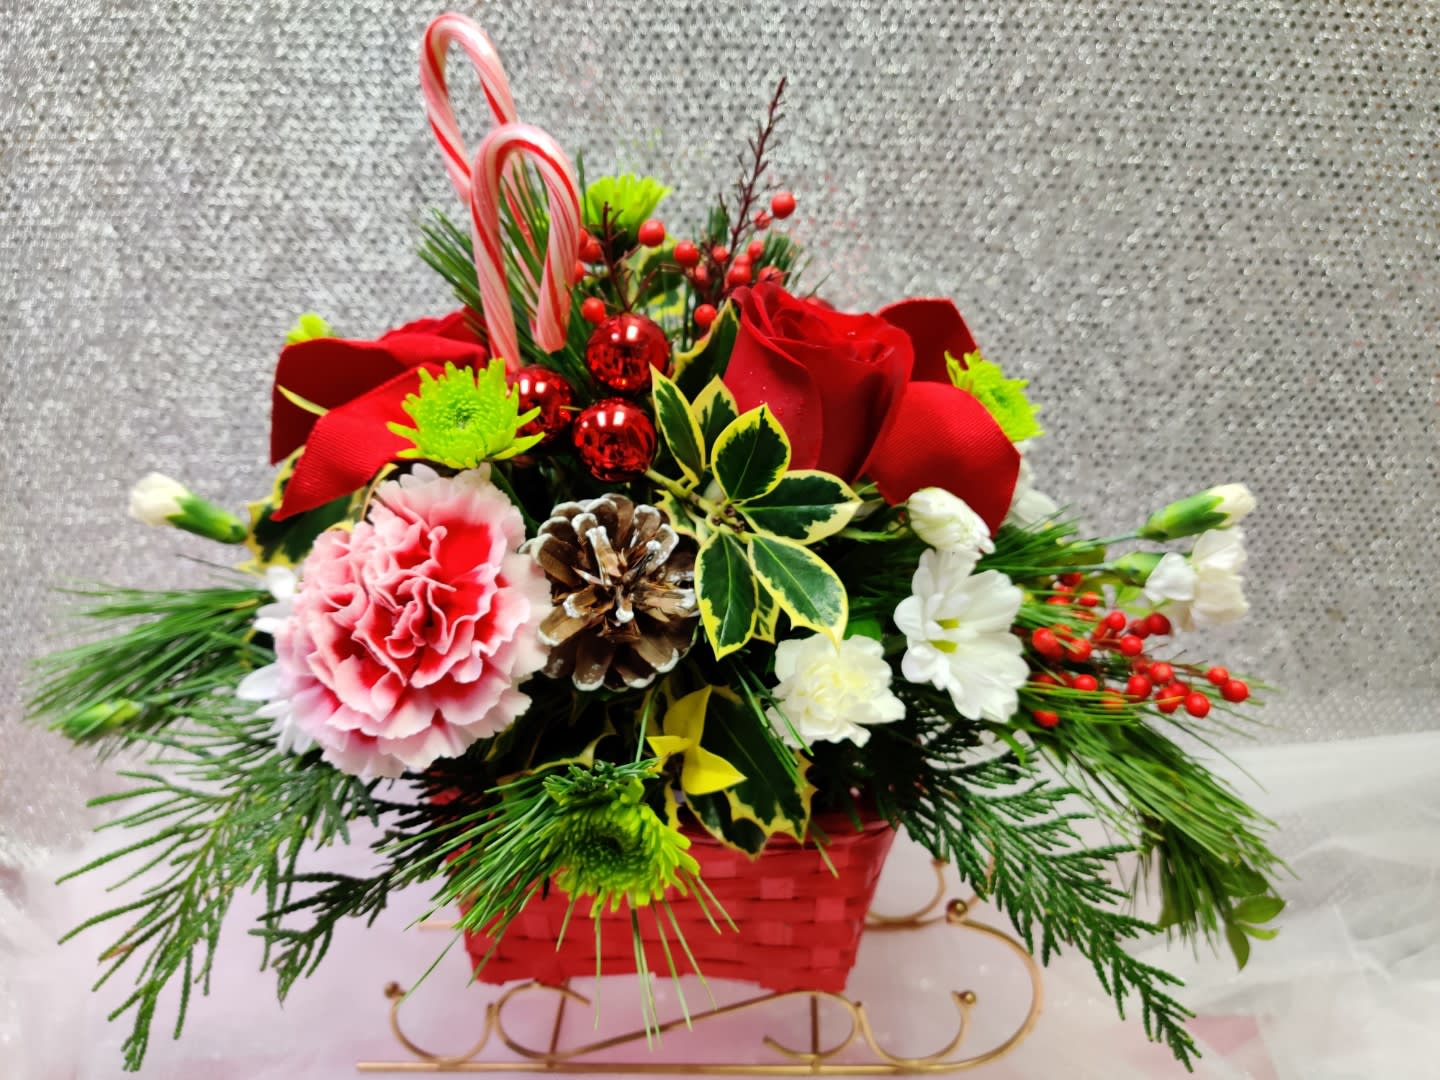 Christmas Sleigh - Contains Roses, Carnations, Poms, Evergreen, Candy Cane and Ornaments.